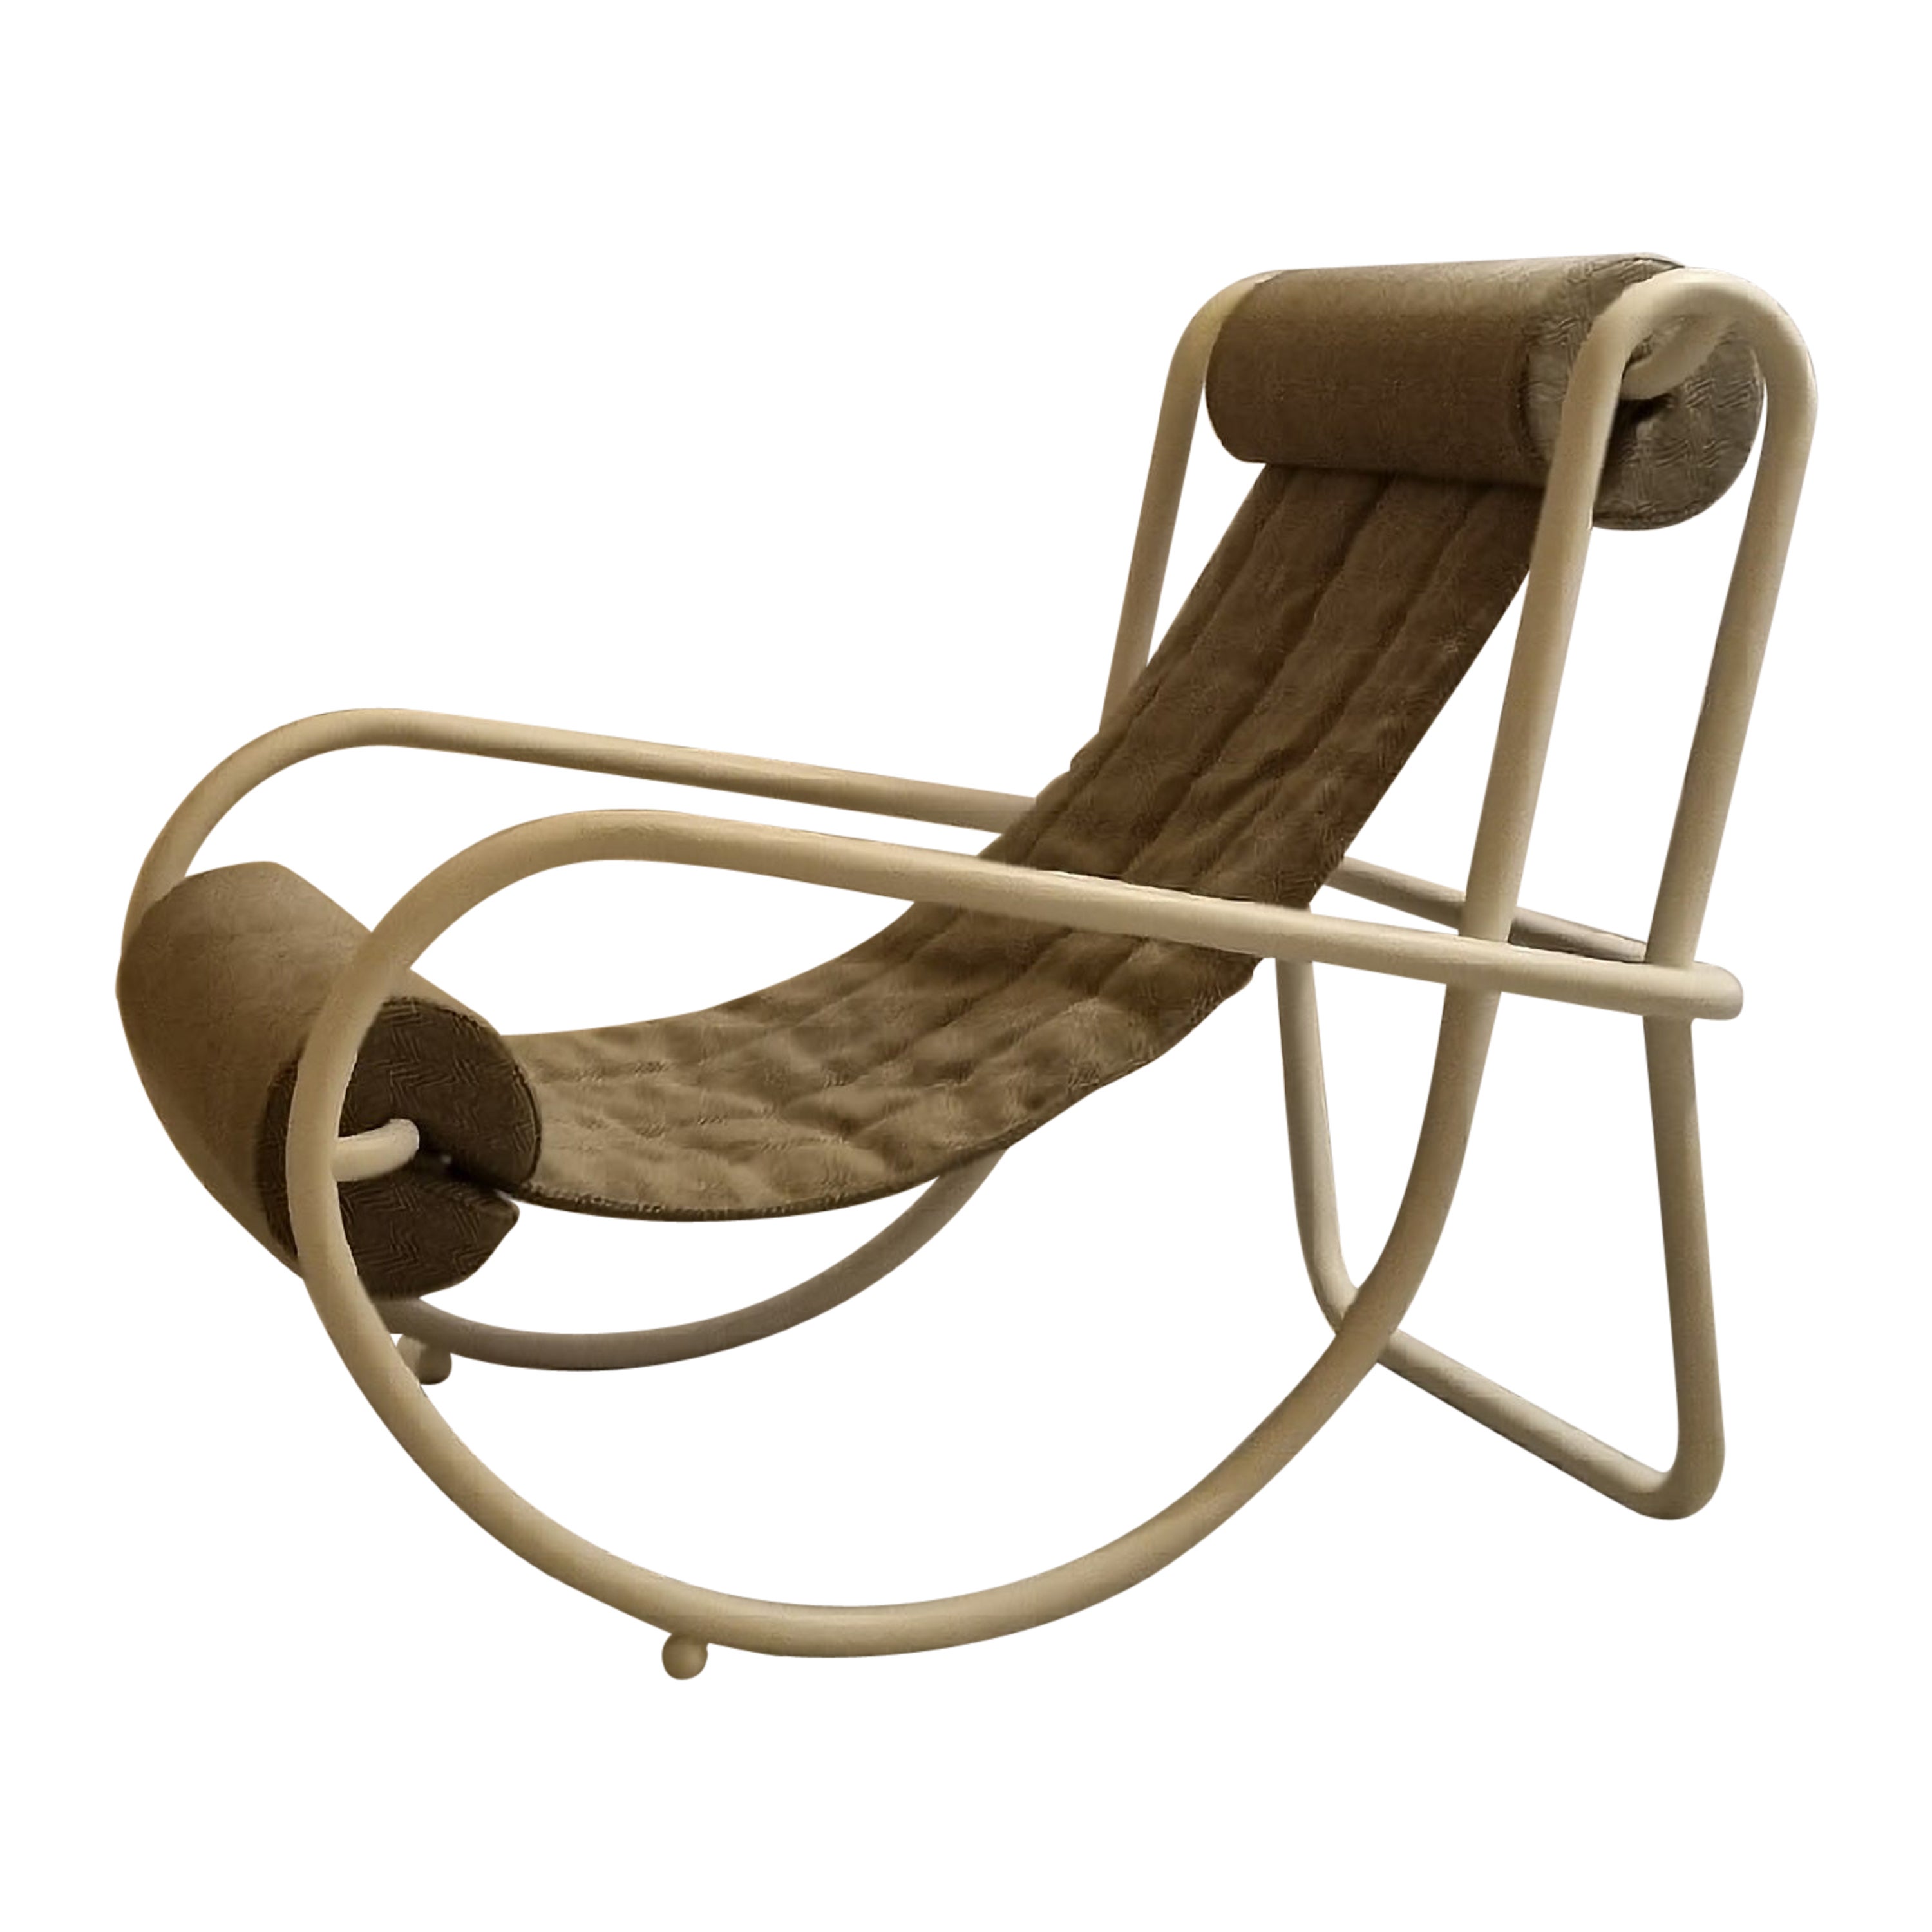 Locus Solus armchair by Gae Aulenti for Poltronova, 1964 For Sale